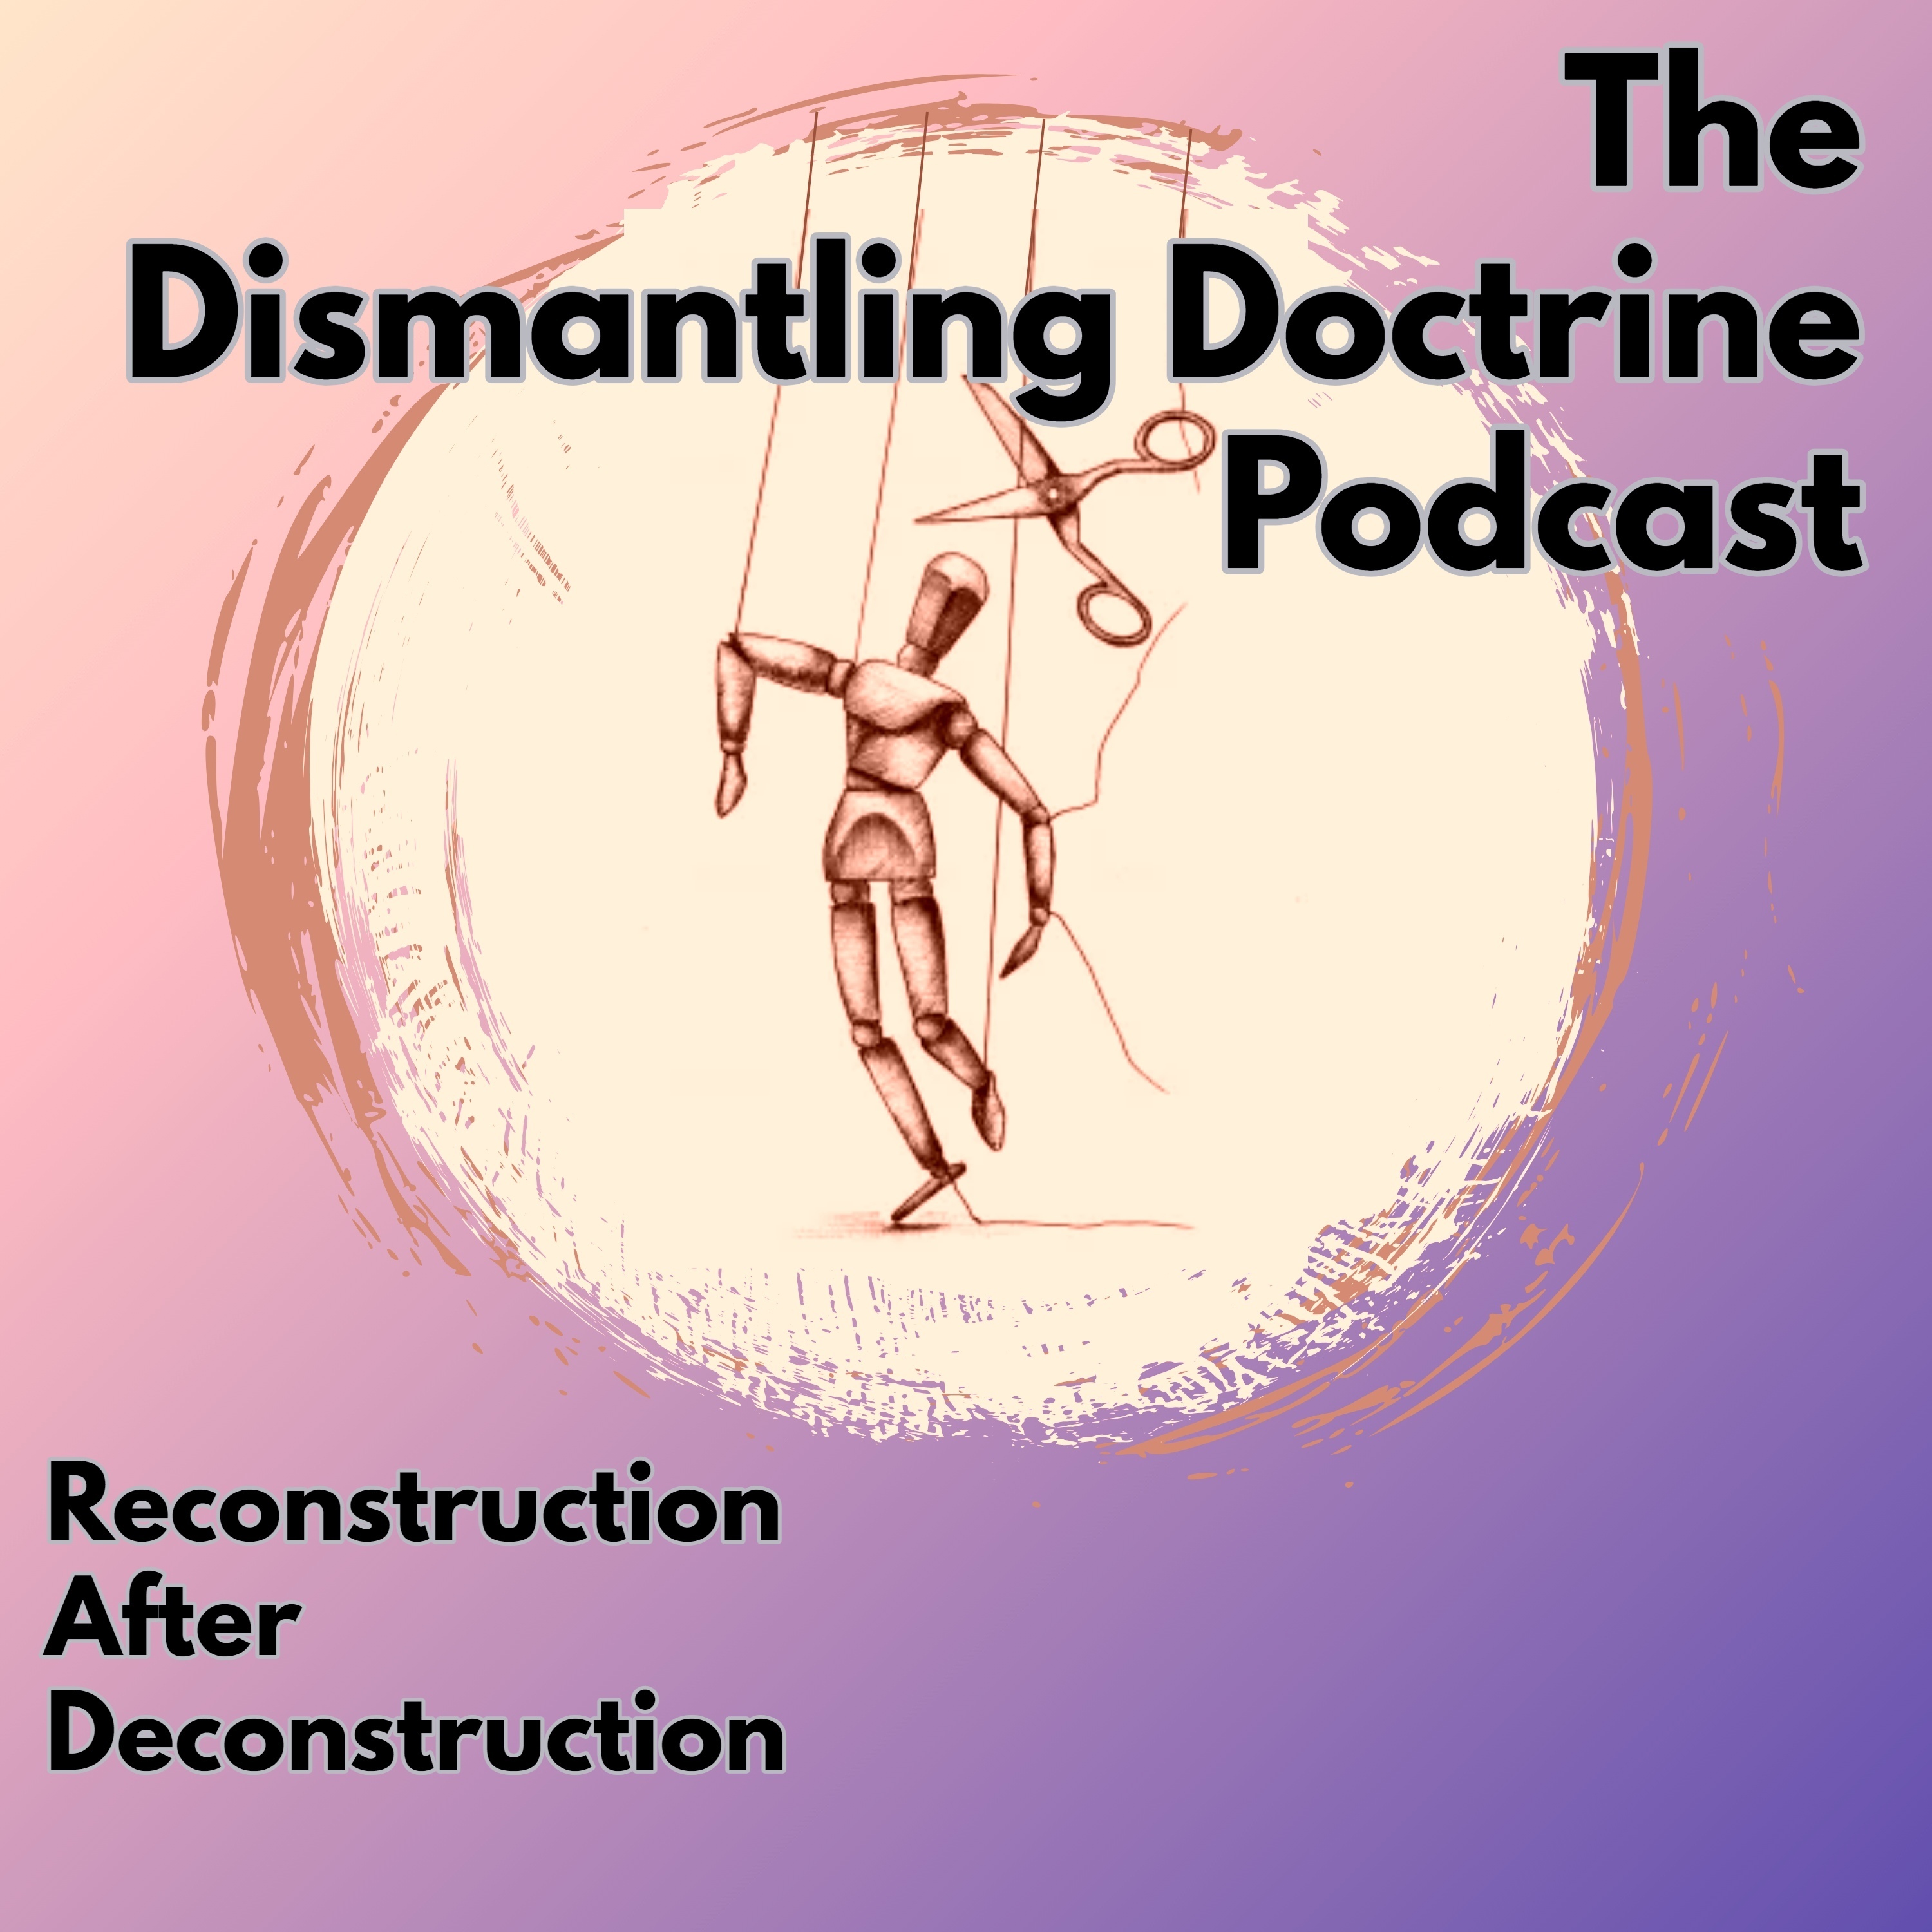 The Dismantling Doctrine Podcast